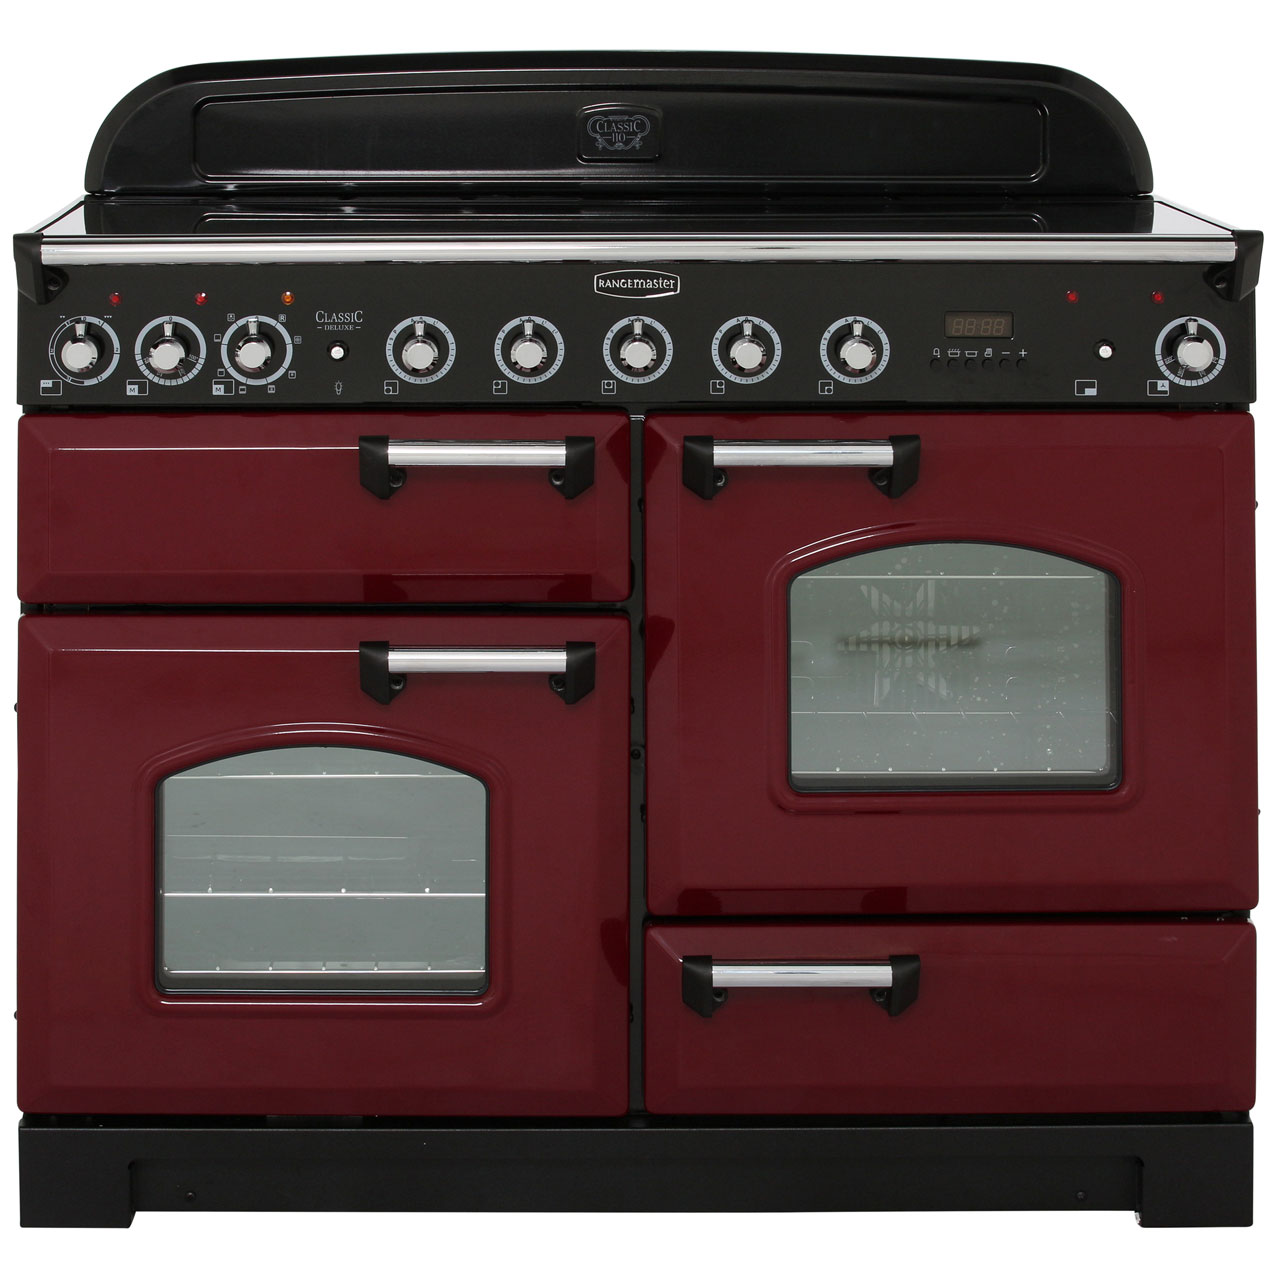 Rangemaster Classic Deluxe CDL110EICY/C 110cm Electric Range Cooker with Induction Hob - Cranberry / Chrome - A/A Rated, Red